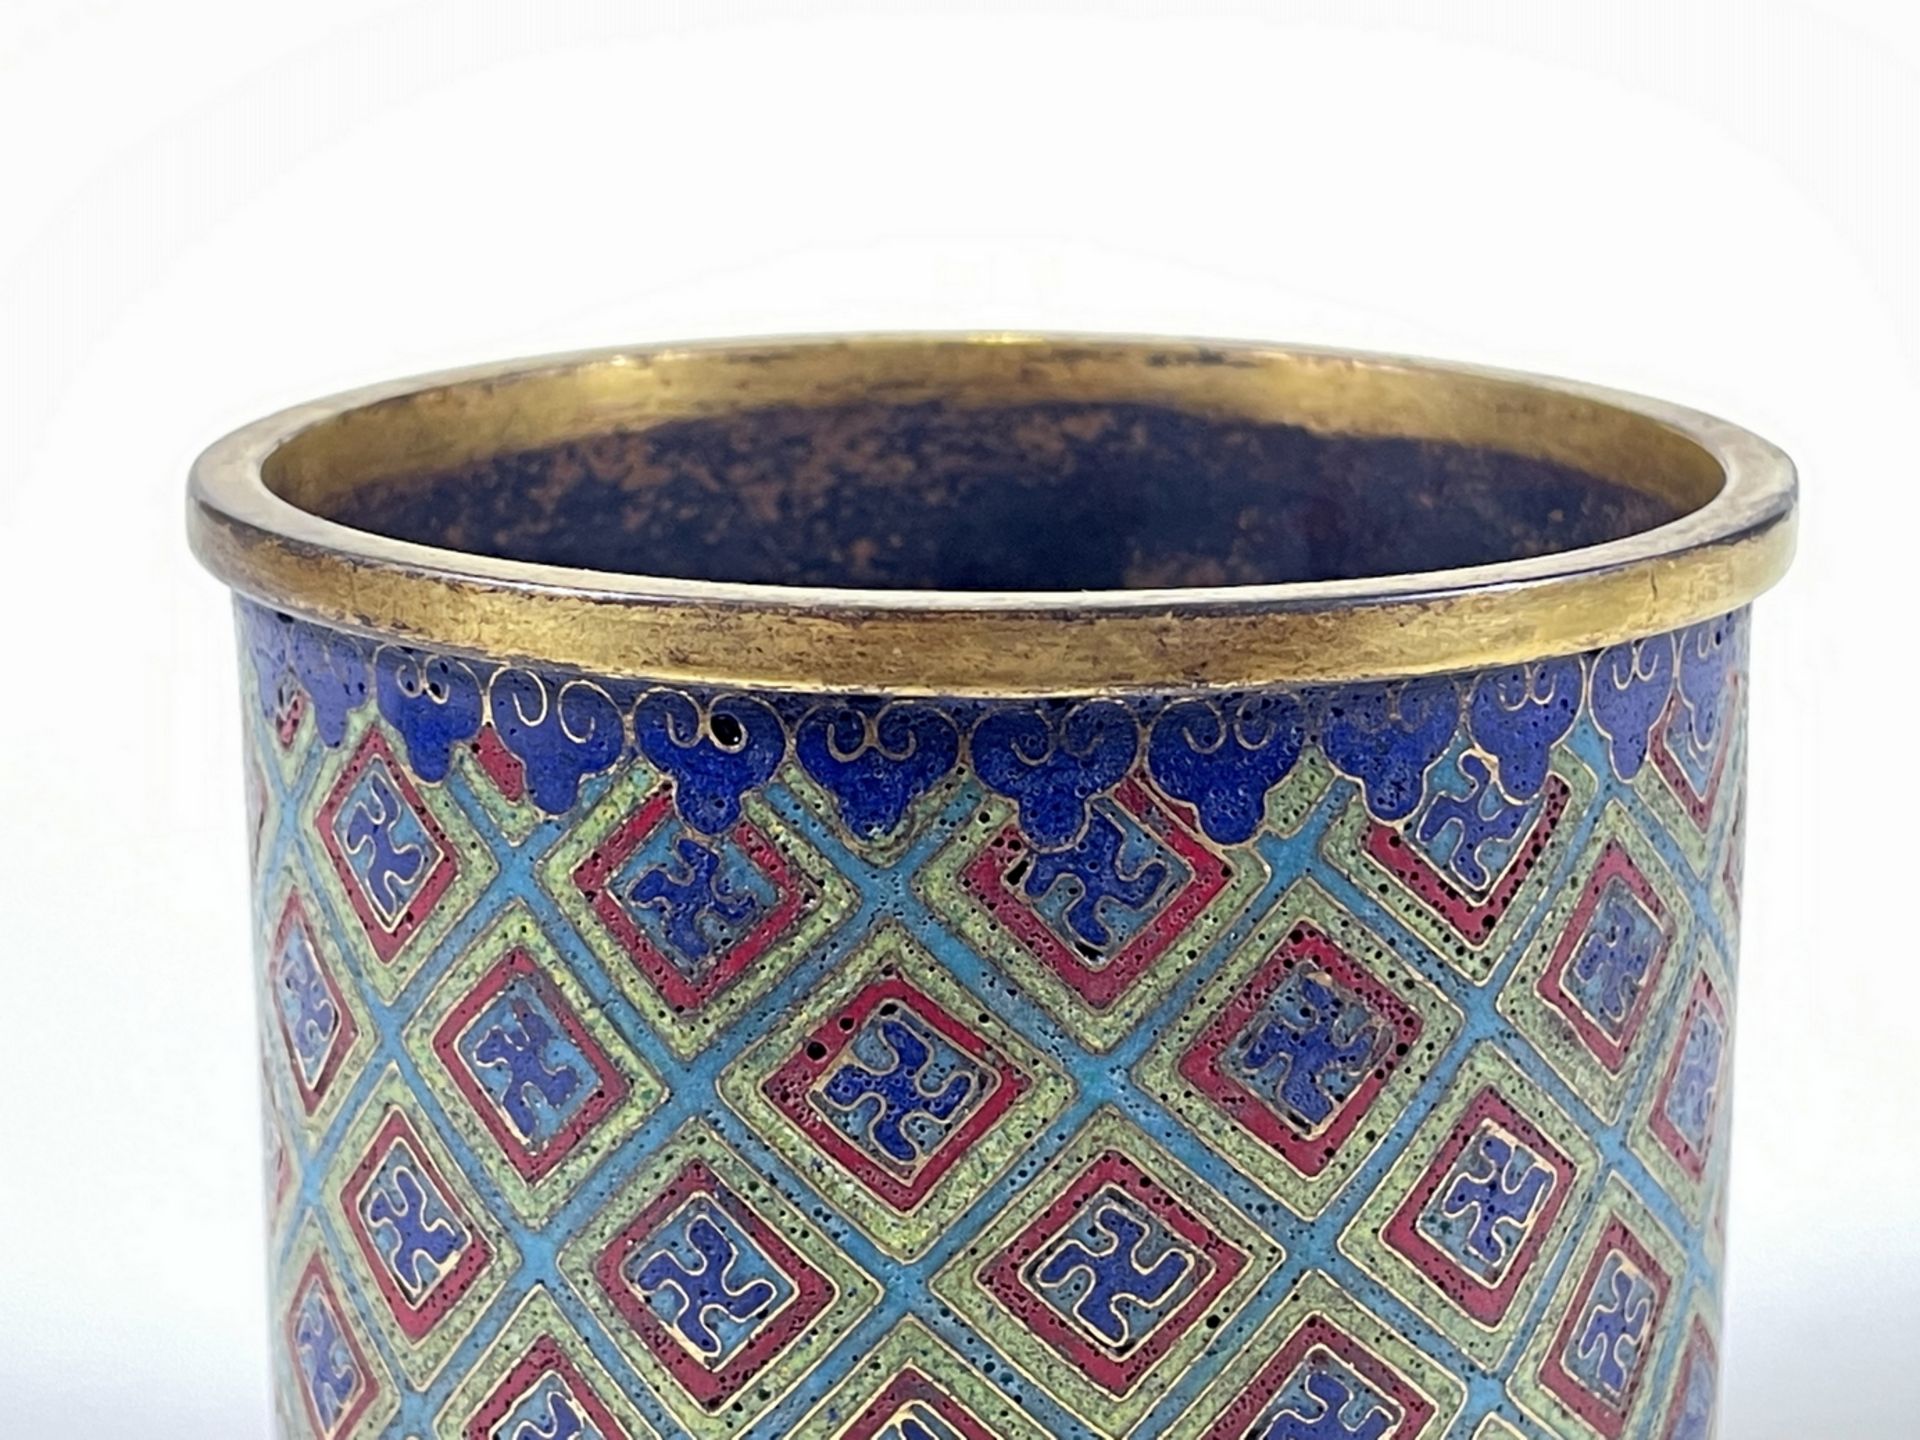 FINE CHINESE CLOISONNE, 18TH/19TH Century Pr. Collection of NARA private gallary.  - Image 10 of 11